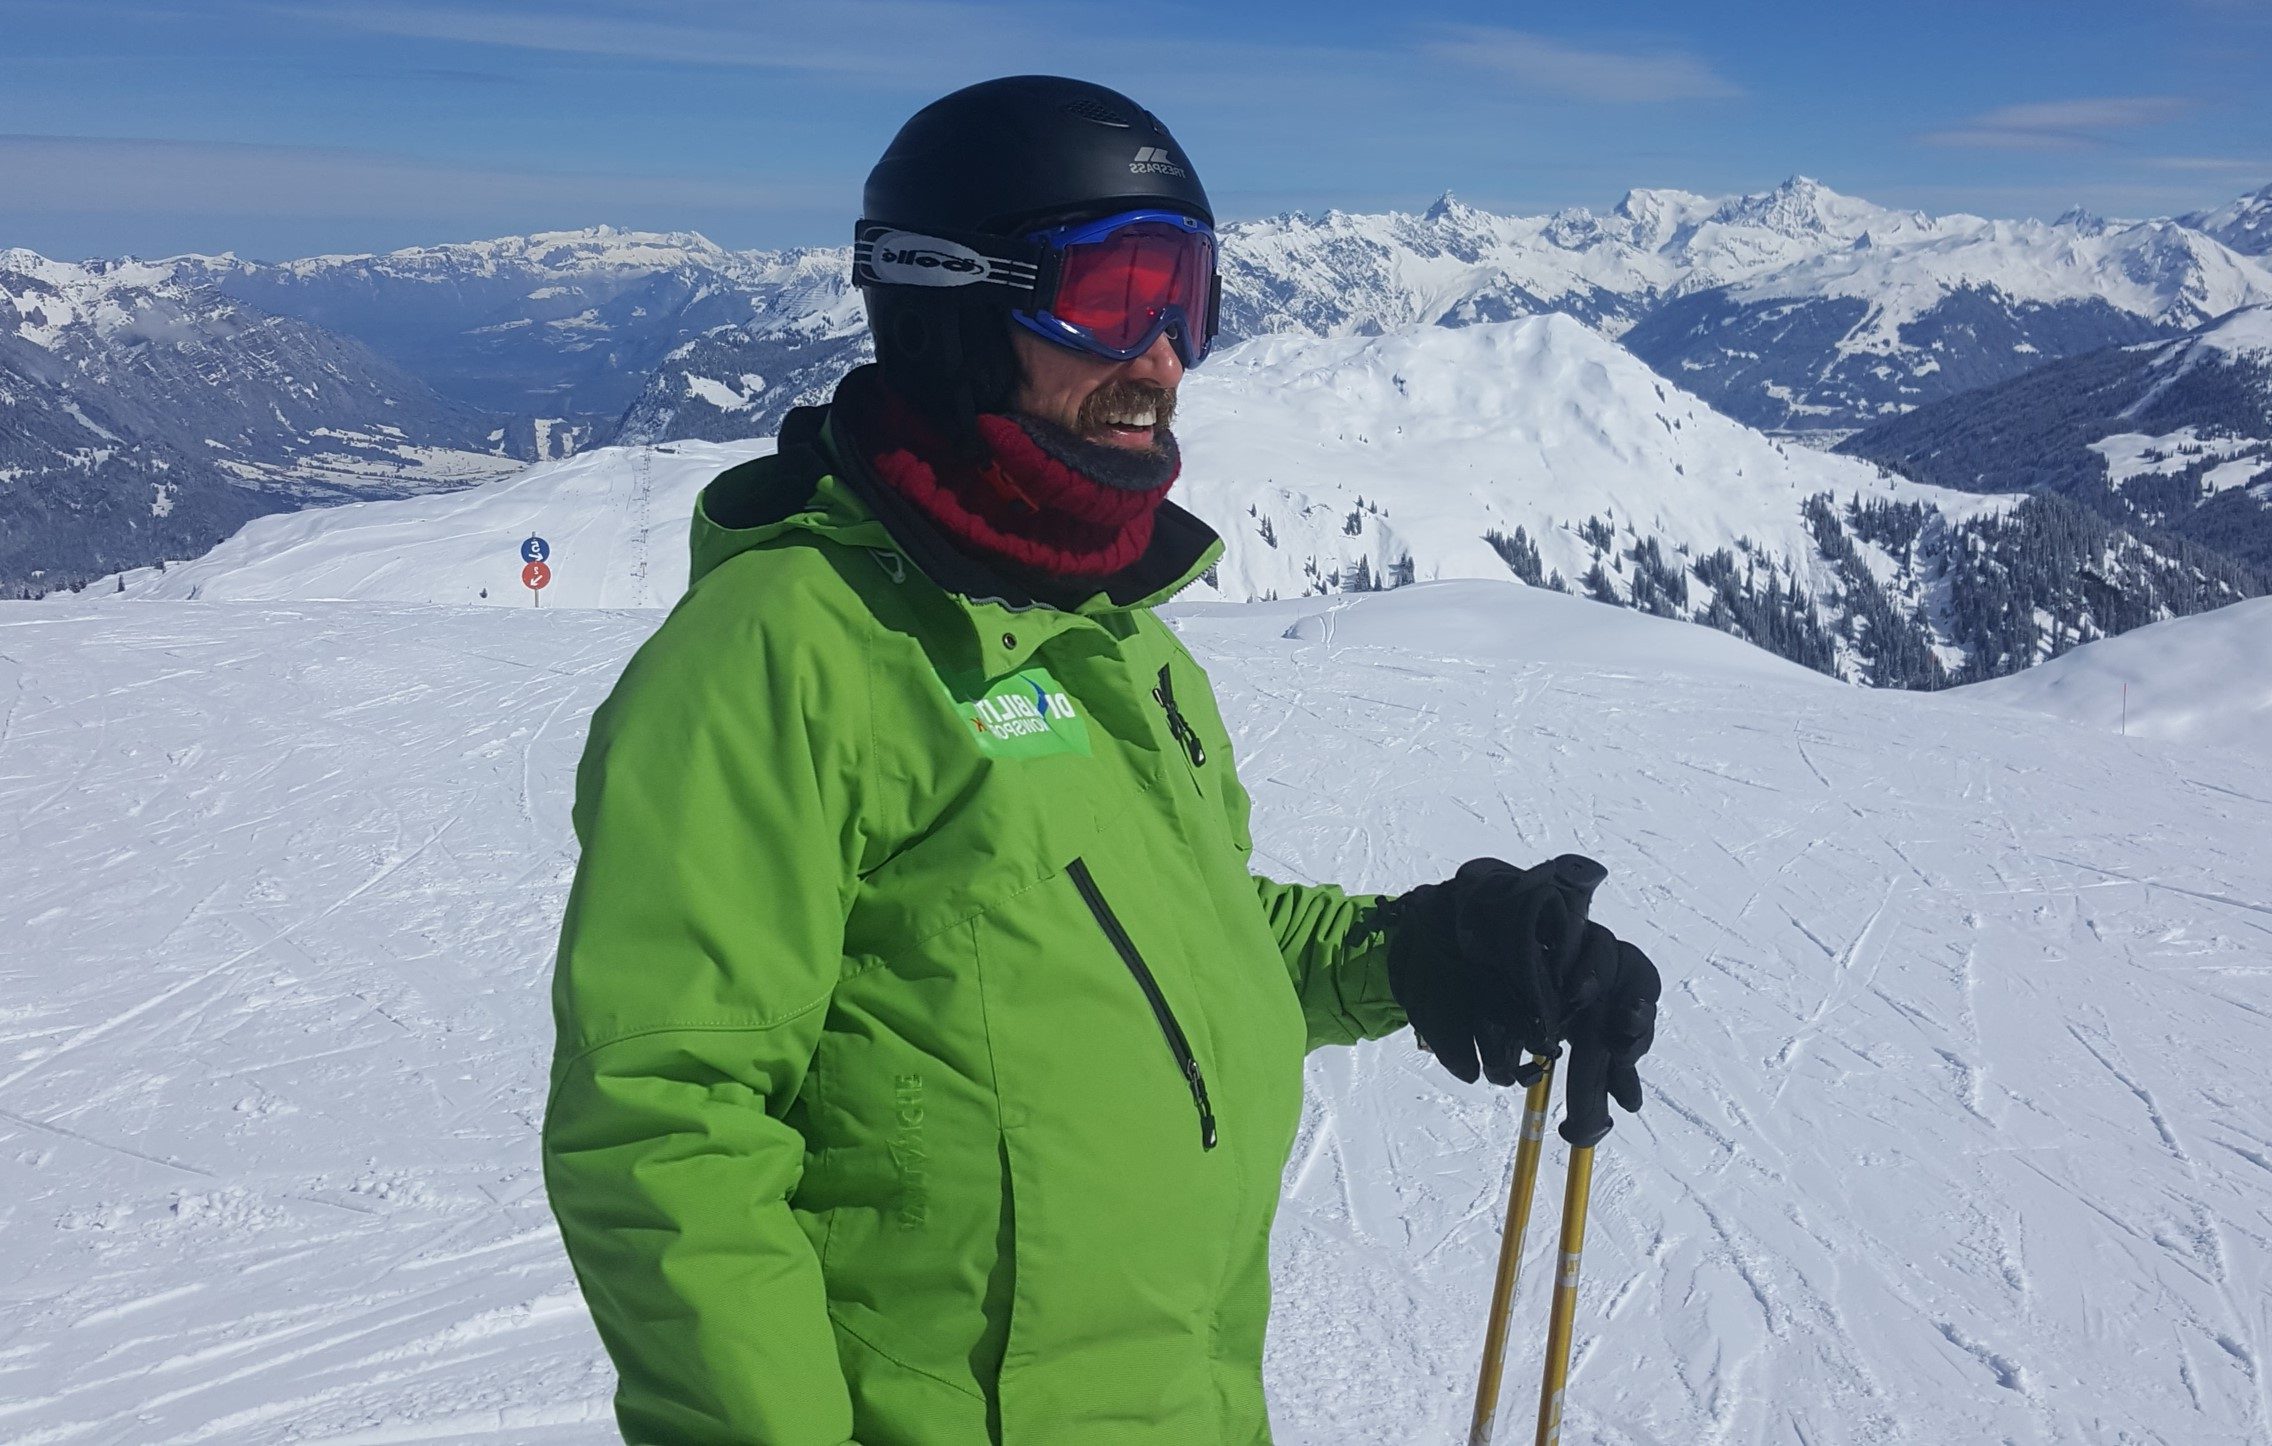 INGHAMS SKI HOLIDAYS, AND THEIR SUPPORT FOR DISABLED TRAVELERS